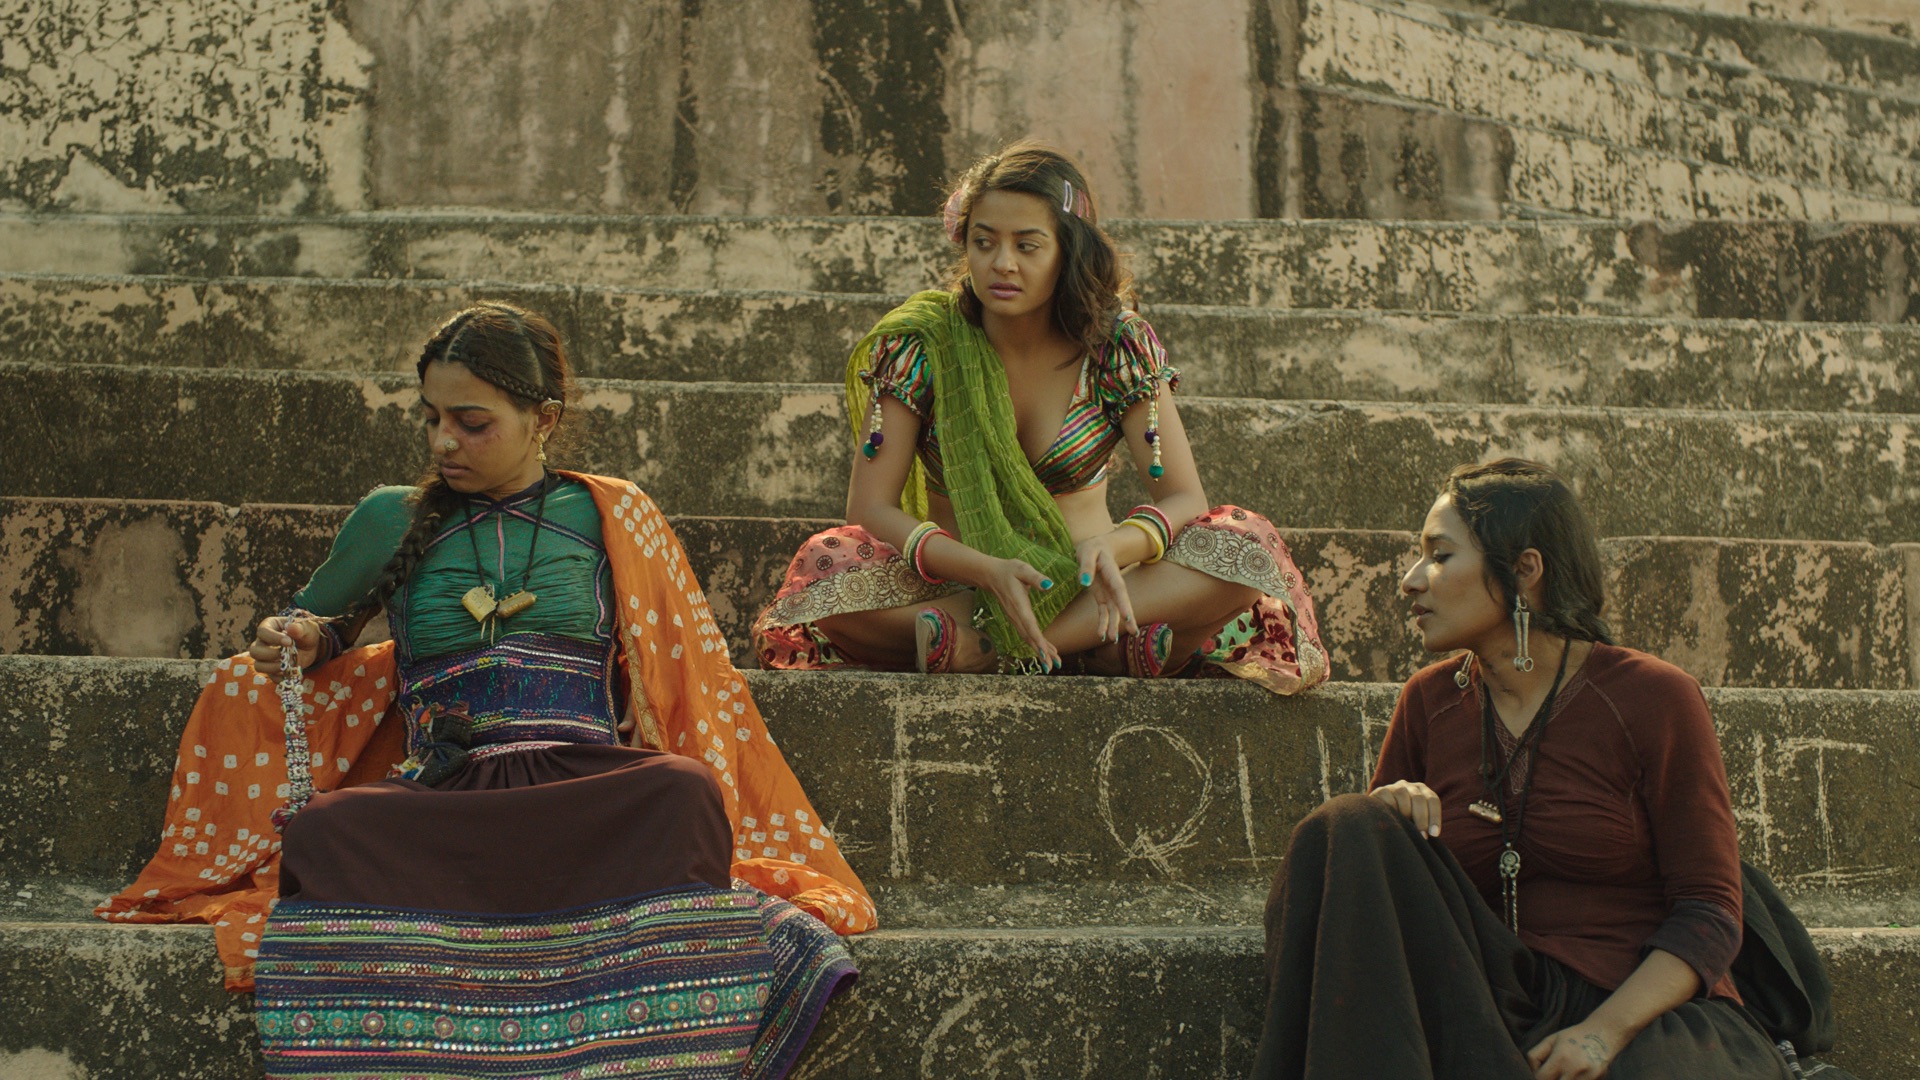 Parched, closing film of the festival